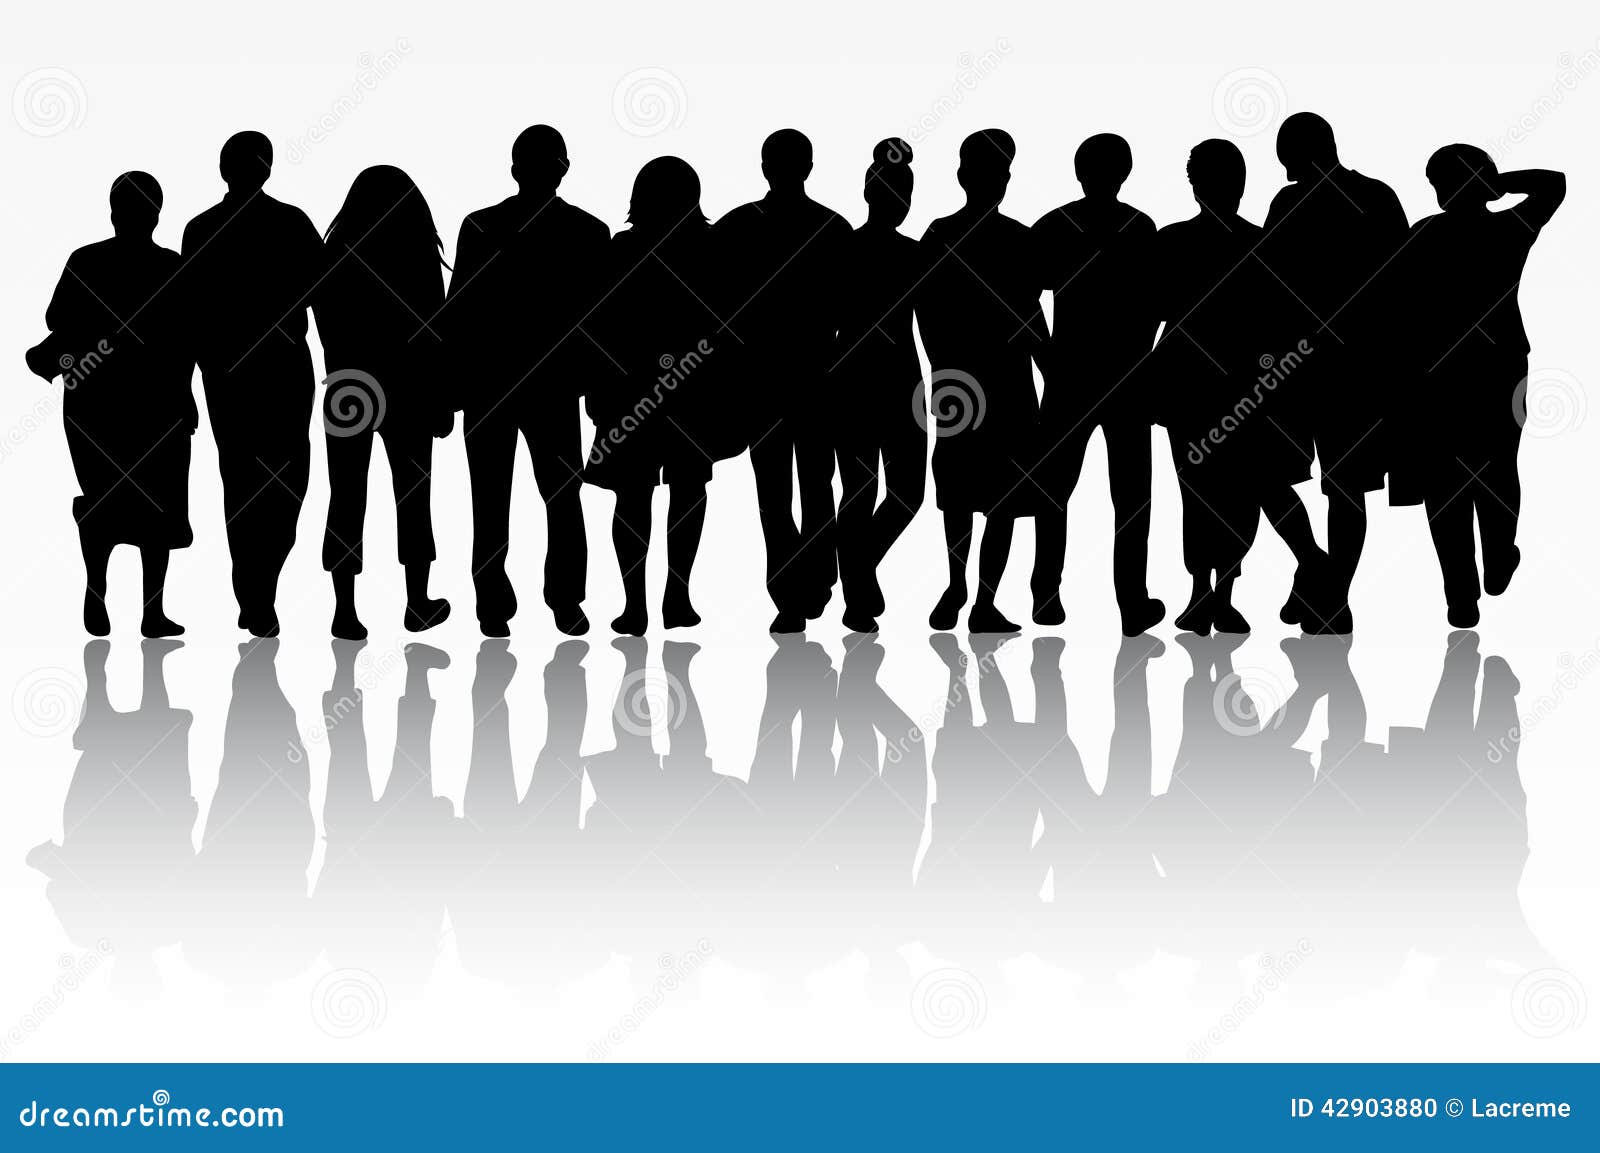 People silhouettes stock vector. Illustration of happy - 42903880